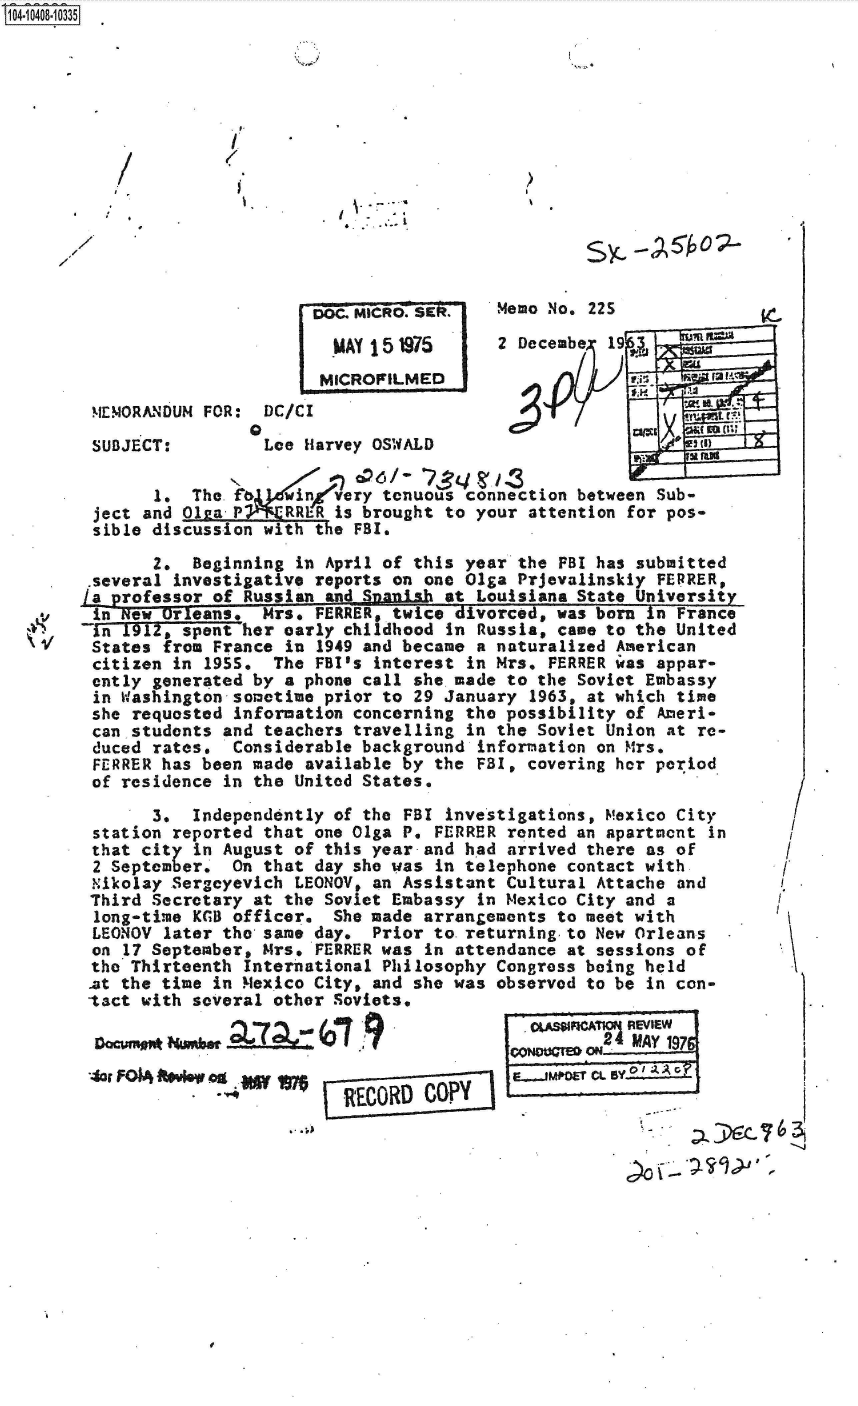 handle is hein.jfk/jfkarch48270 and id is 1 raw text is: S1O4~iO4O8~1O335


*~ - :2
4


s~c   A~o--


                      D~ MICR. R


                      MICROFILMED
!ENIORANDUM FOR: DC/C I


SUBJECT:


.
Lee  Harvey OSWALD


ecuo No~e ZZ3

Decembe-  19,


     2p~zJ;W x


       1.  The.      inevery  tenuous connection between Sub-
 ject and 01sa P RR'R is brought to your attention for pos-
 sible discussion with t e FBI.

       2.  Beginning in April of this year  the FBI has submitted
 .several investigative reports on one Olga Prjevalinskly FERRER,
La professor of Russian _and Snish  at Louisiana State University


inR -Orleans, Mrs. FERRER, twice divorced, was born In France
-in 1912, spent her early childhood in  Russia, came to the United
States  from France in  1949 and became a naturalized American
citizen  in l95S.  The FBI's interest  in Mrs. FERRER was appar-
cntly  generated by a phone call she made  to the Soviet Embassy
in  Washington sometime prior to 29 January  1963, at which time
she  requested information concerning the  possibility of Ameri-
can  students and teachers travelling  in the Soviet Union at re-
duced  rates.  Considerable background  information on Mrs.
FERRER  has been made available by the  FBI, covering her period
of  residence in the United States.


      3.  Independently  of the FBI investigations, Mexico City
station reported  that one Olga P. FERRER rented an apartment in
that city  in August of this year and had arrived there as of
2 September.  On  that day she was in telephone contact with
Nikolay Sergcyevich  LEONOV, an Assistant Cultural Attache and
Third Secretary  at the Soviet Embassy in Mexico City and a
long-time KGB officer.   She made arrangements to meet with
LEONOV  later the same day. Prior  to. returning to New Orleans
on 17 September, Mrs.  FERRER was in attendance at sessions of
the Thirteenth  International Philosophy Congress being held
at the time in Mexico  City, and she was observed to be in con-
tact with several  other Soviets.


9ouW0            o                             MAY 1976




                 RECORD   COPy I


0


I
(
I


,1


  /
  /
r


I,)


/


I .


-S


I I -


2


